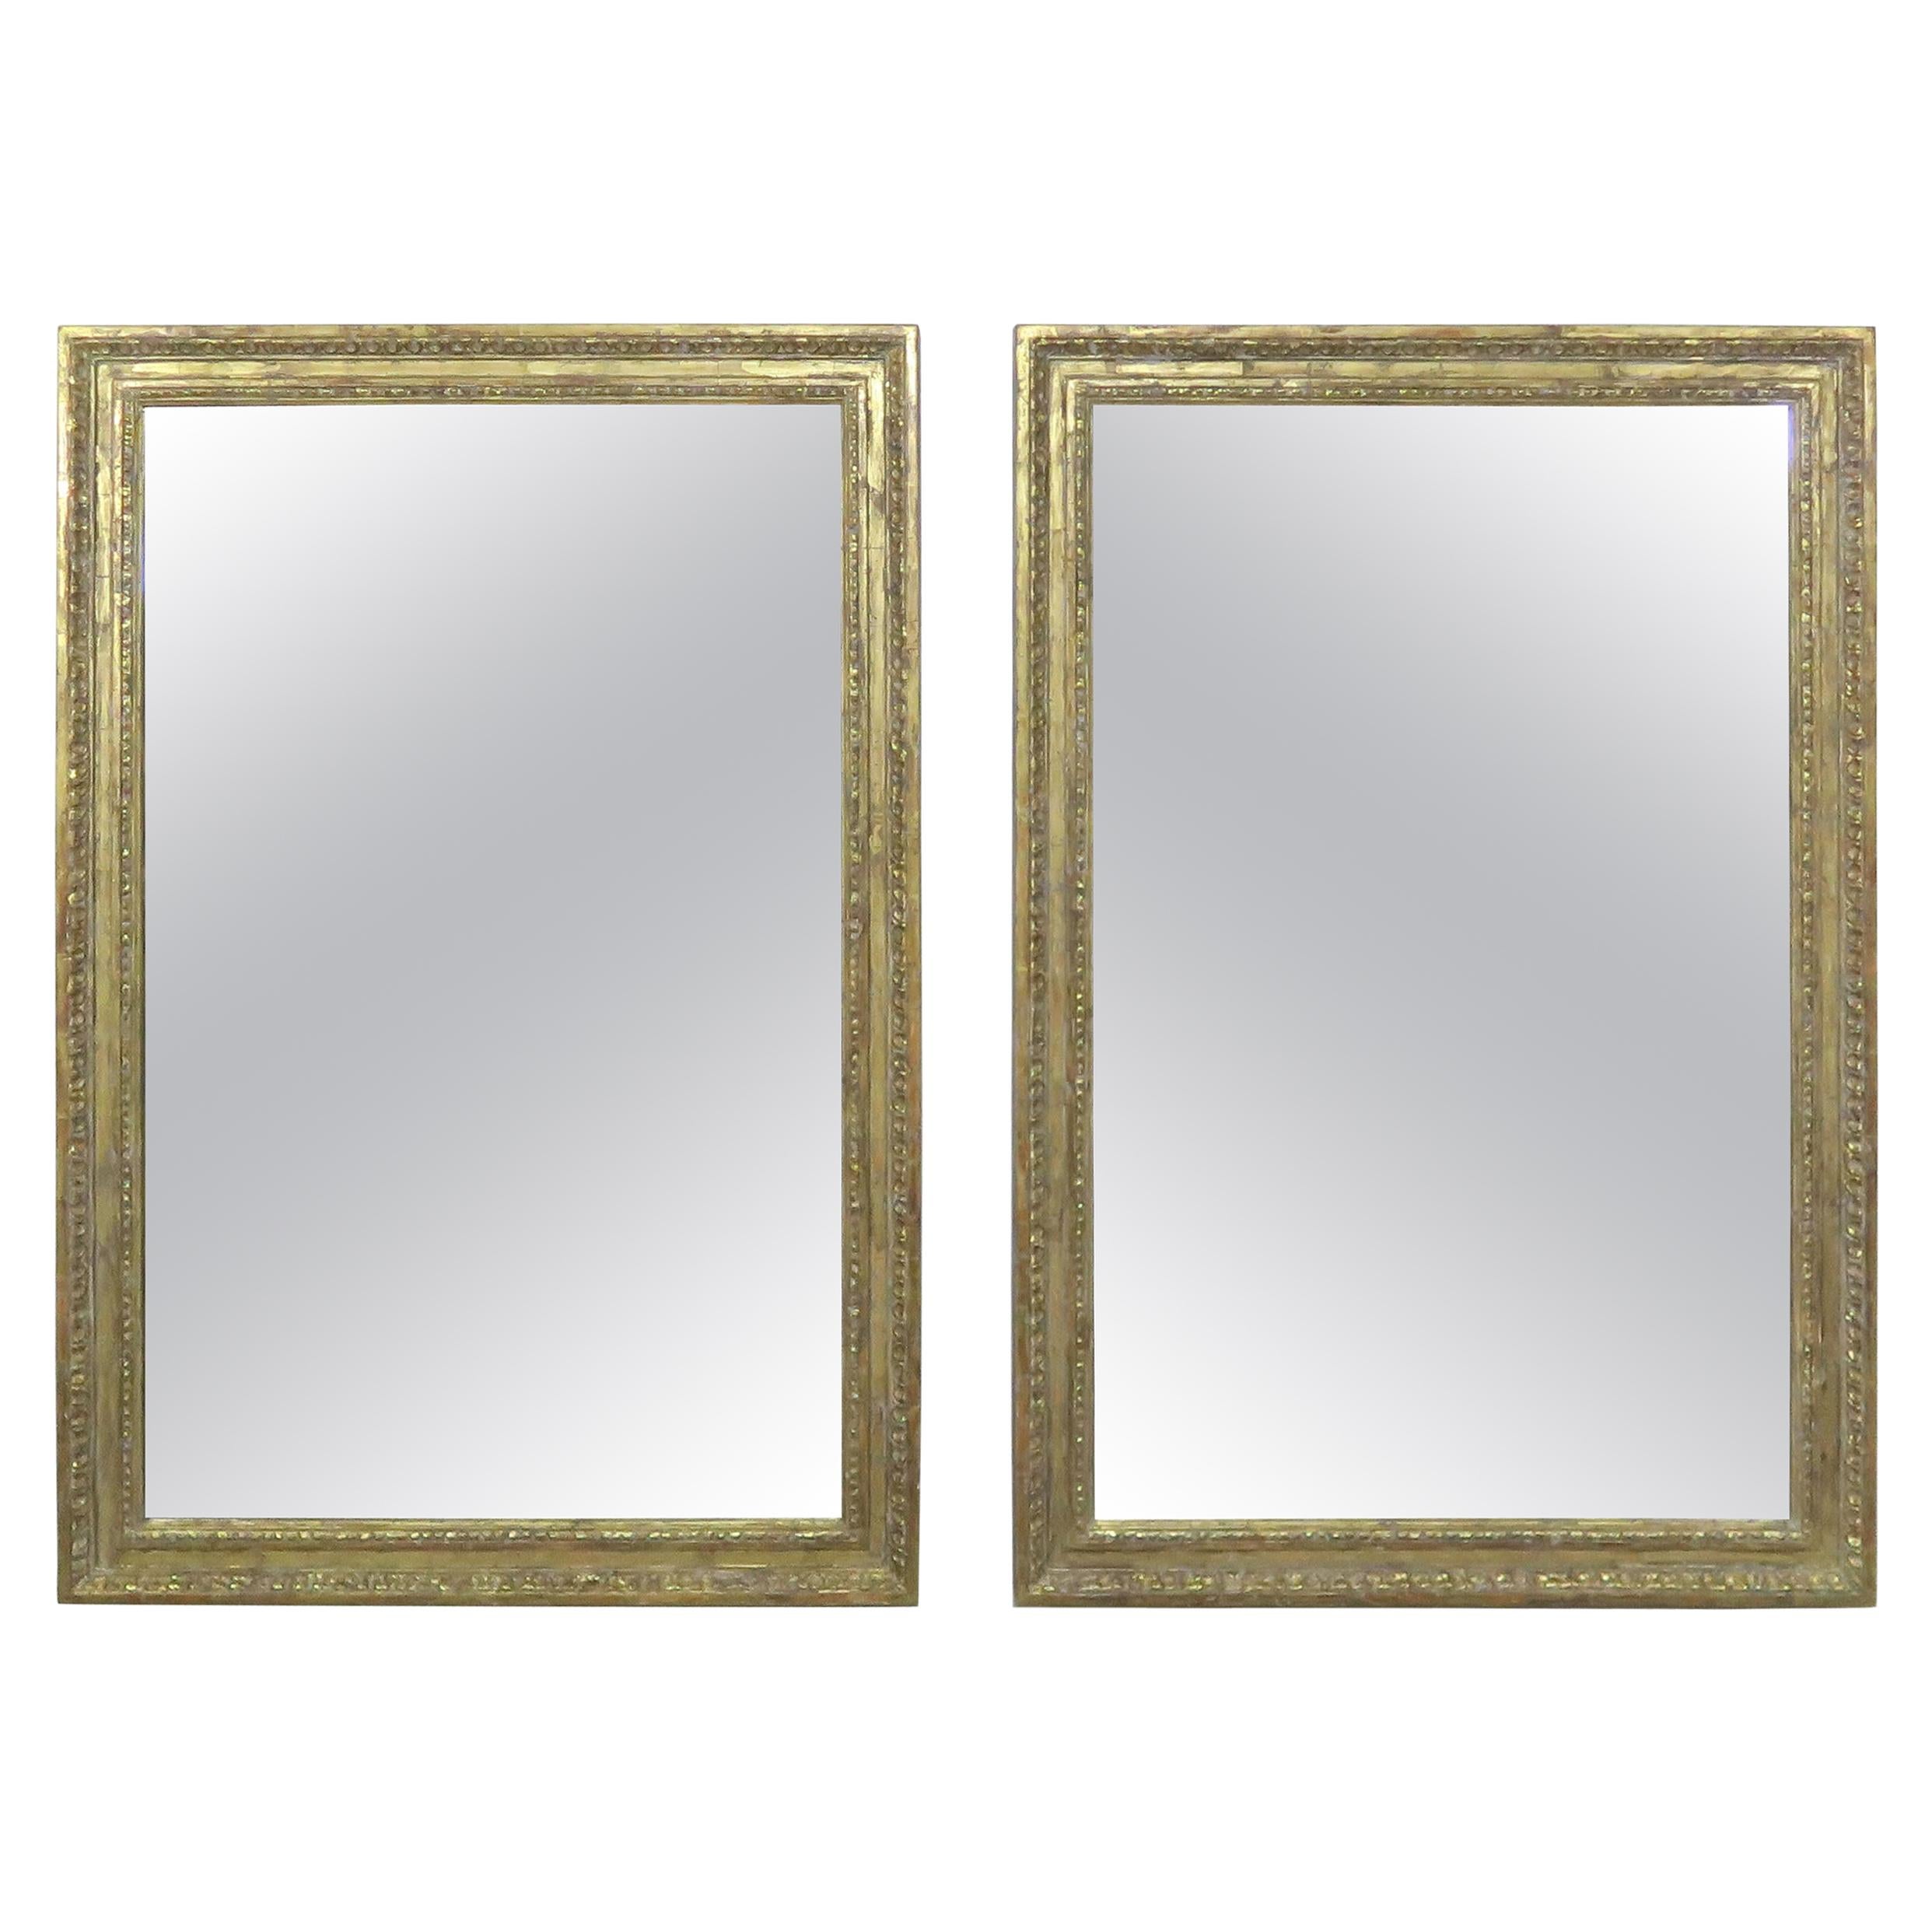 Pair of 22-Karat Gold Leaf Carved Mirrors by Melissa Levinson For Sale